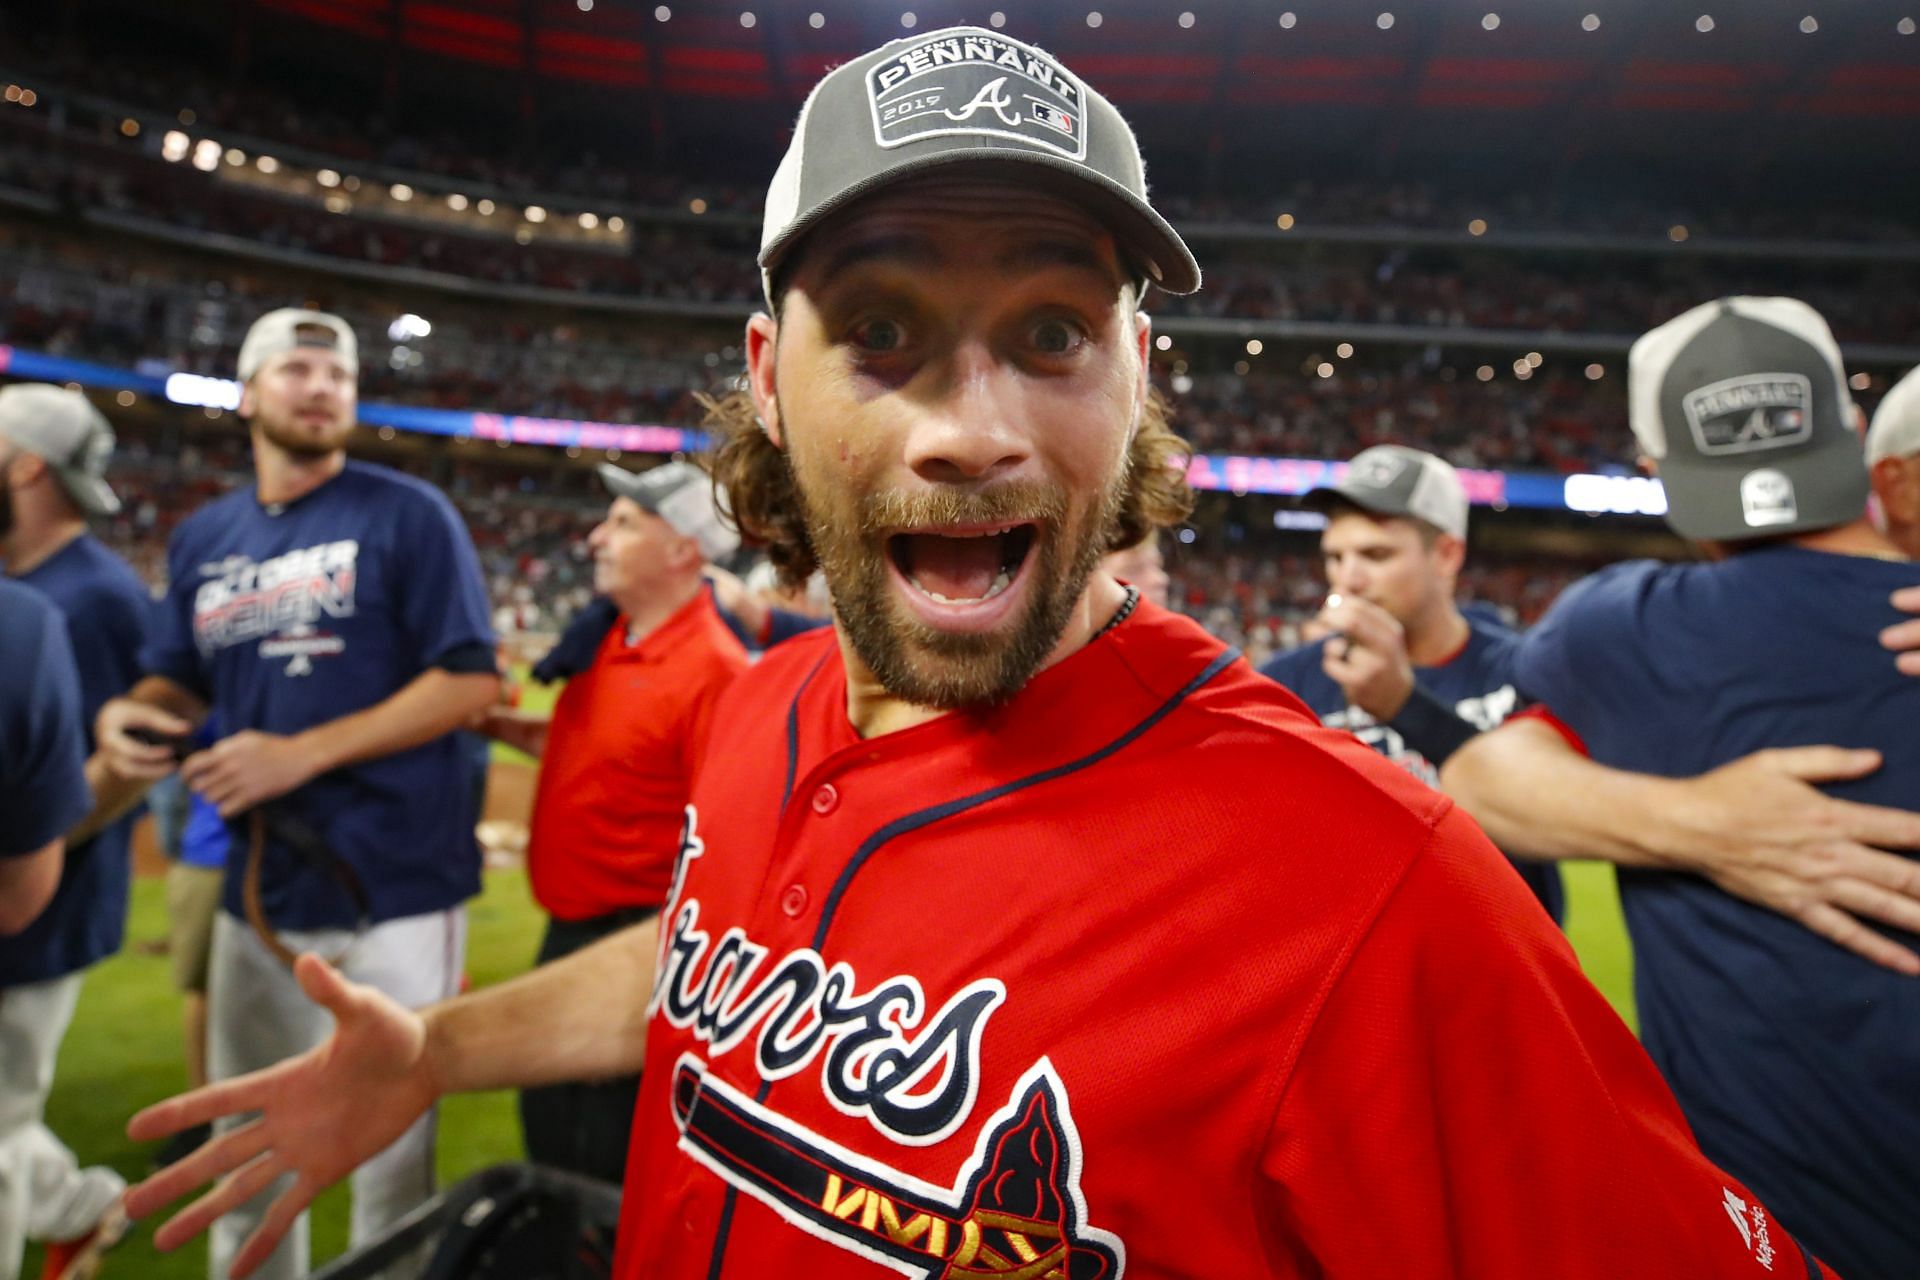 Atlanta Braves fans thrilled by return of promising prospect and fan  favorite Charlie Culberson's return to organization: No one can hate CC!